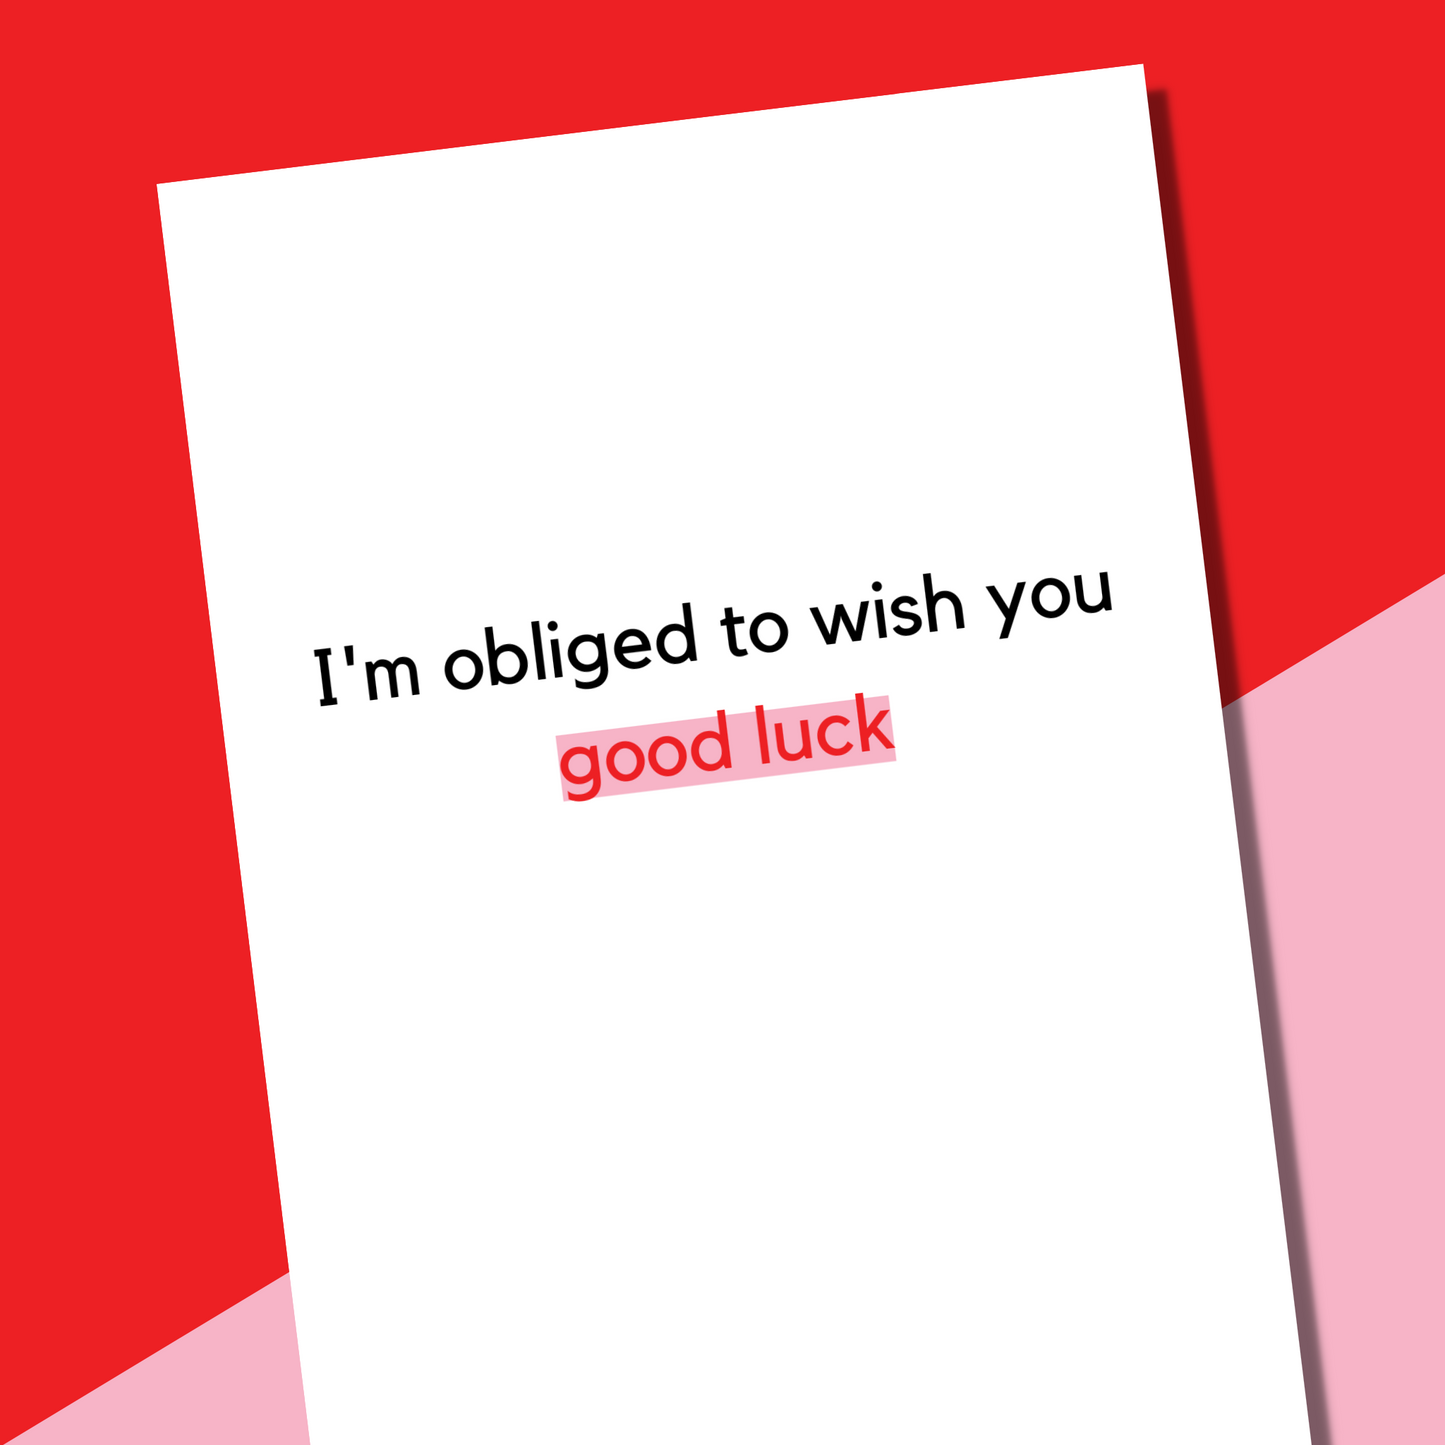 A sassy card that is white with black and red text that says "I'm obliged to wish you good luck"